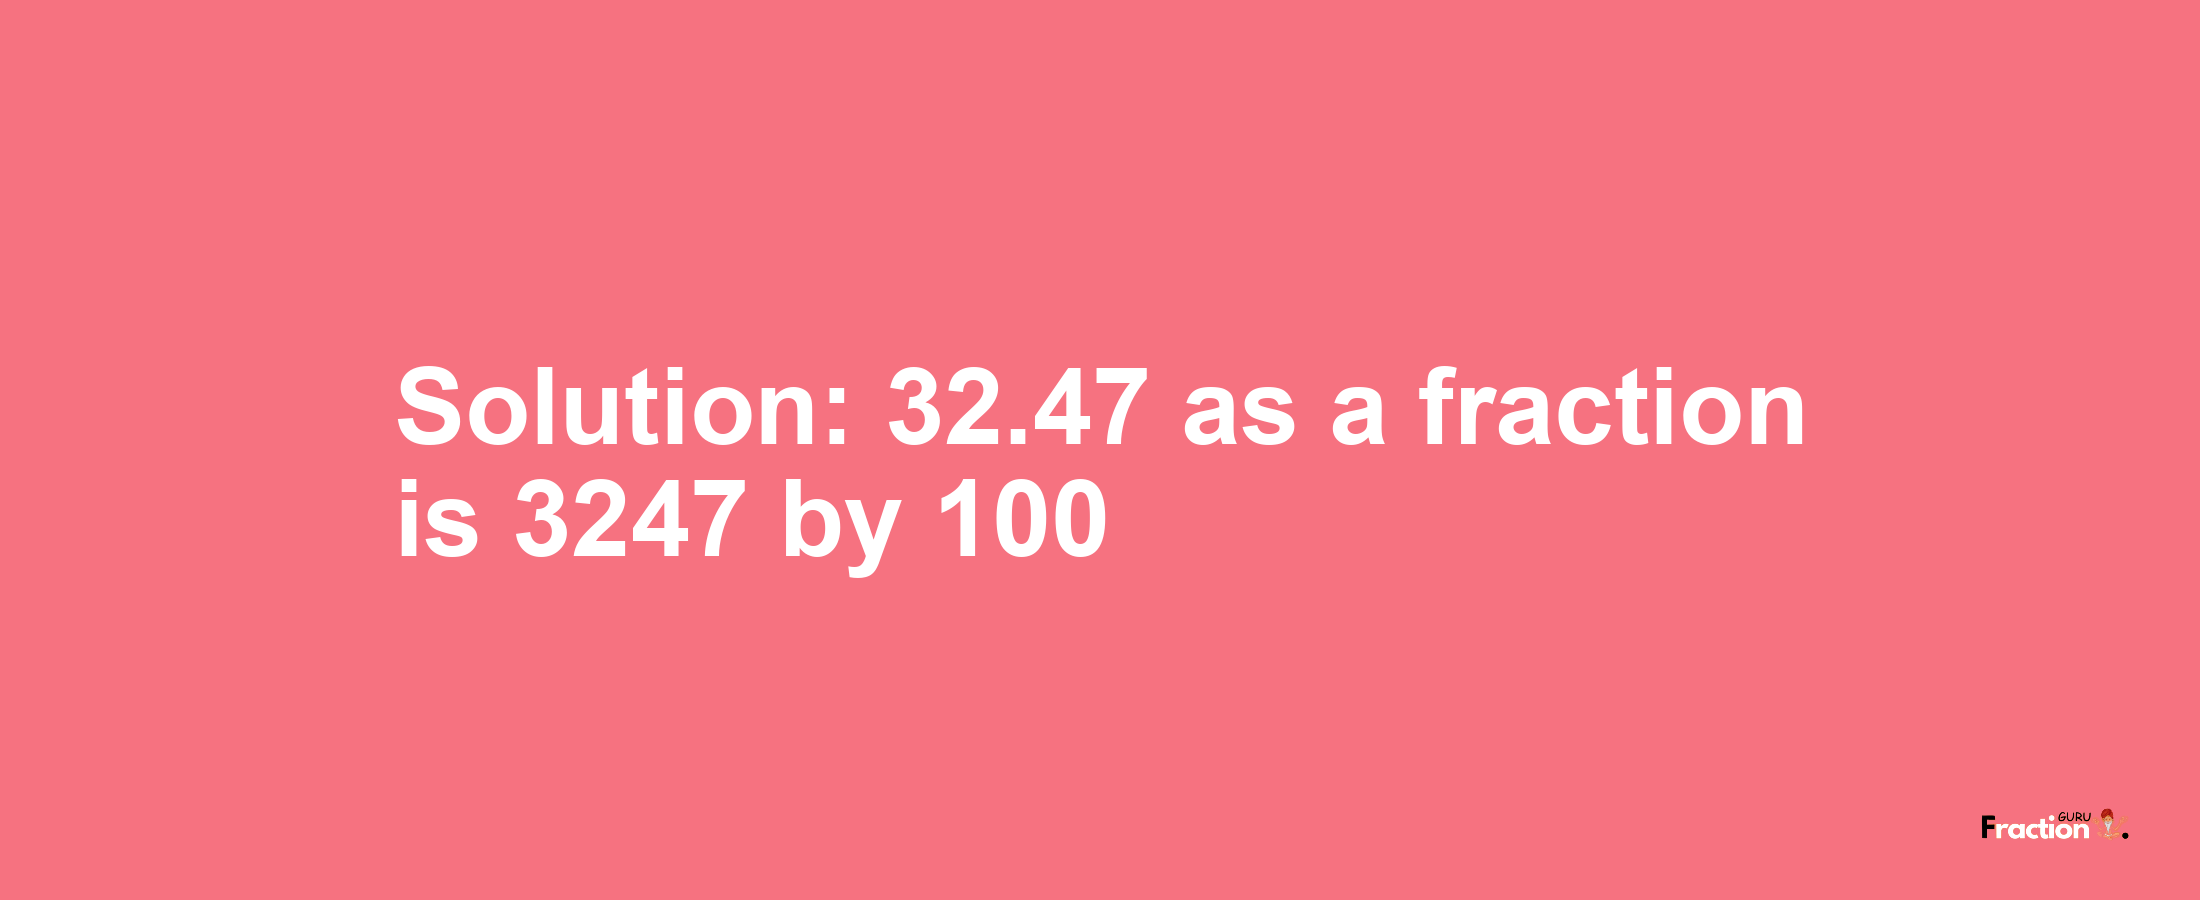 Solution:32.47 as a fraction is 3247/100